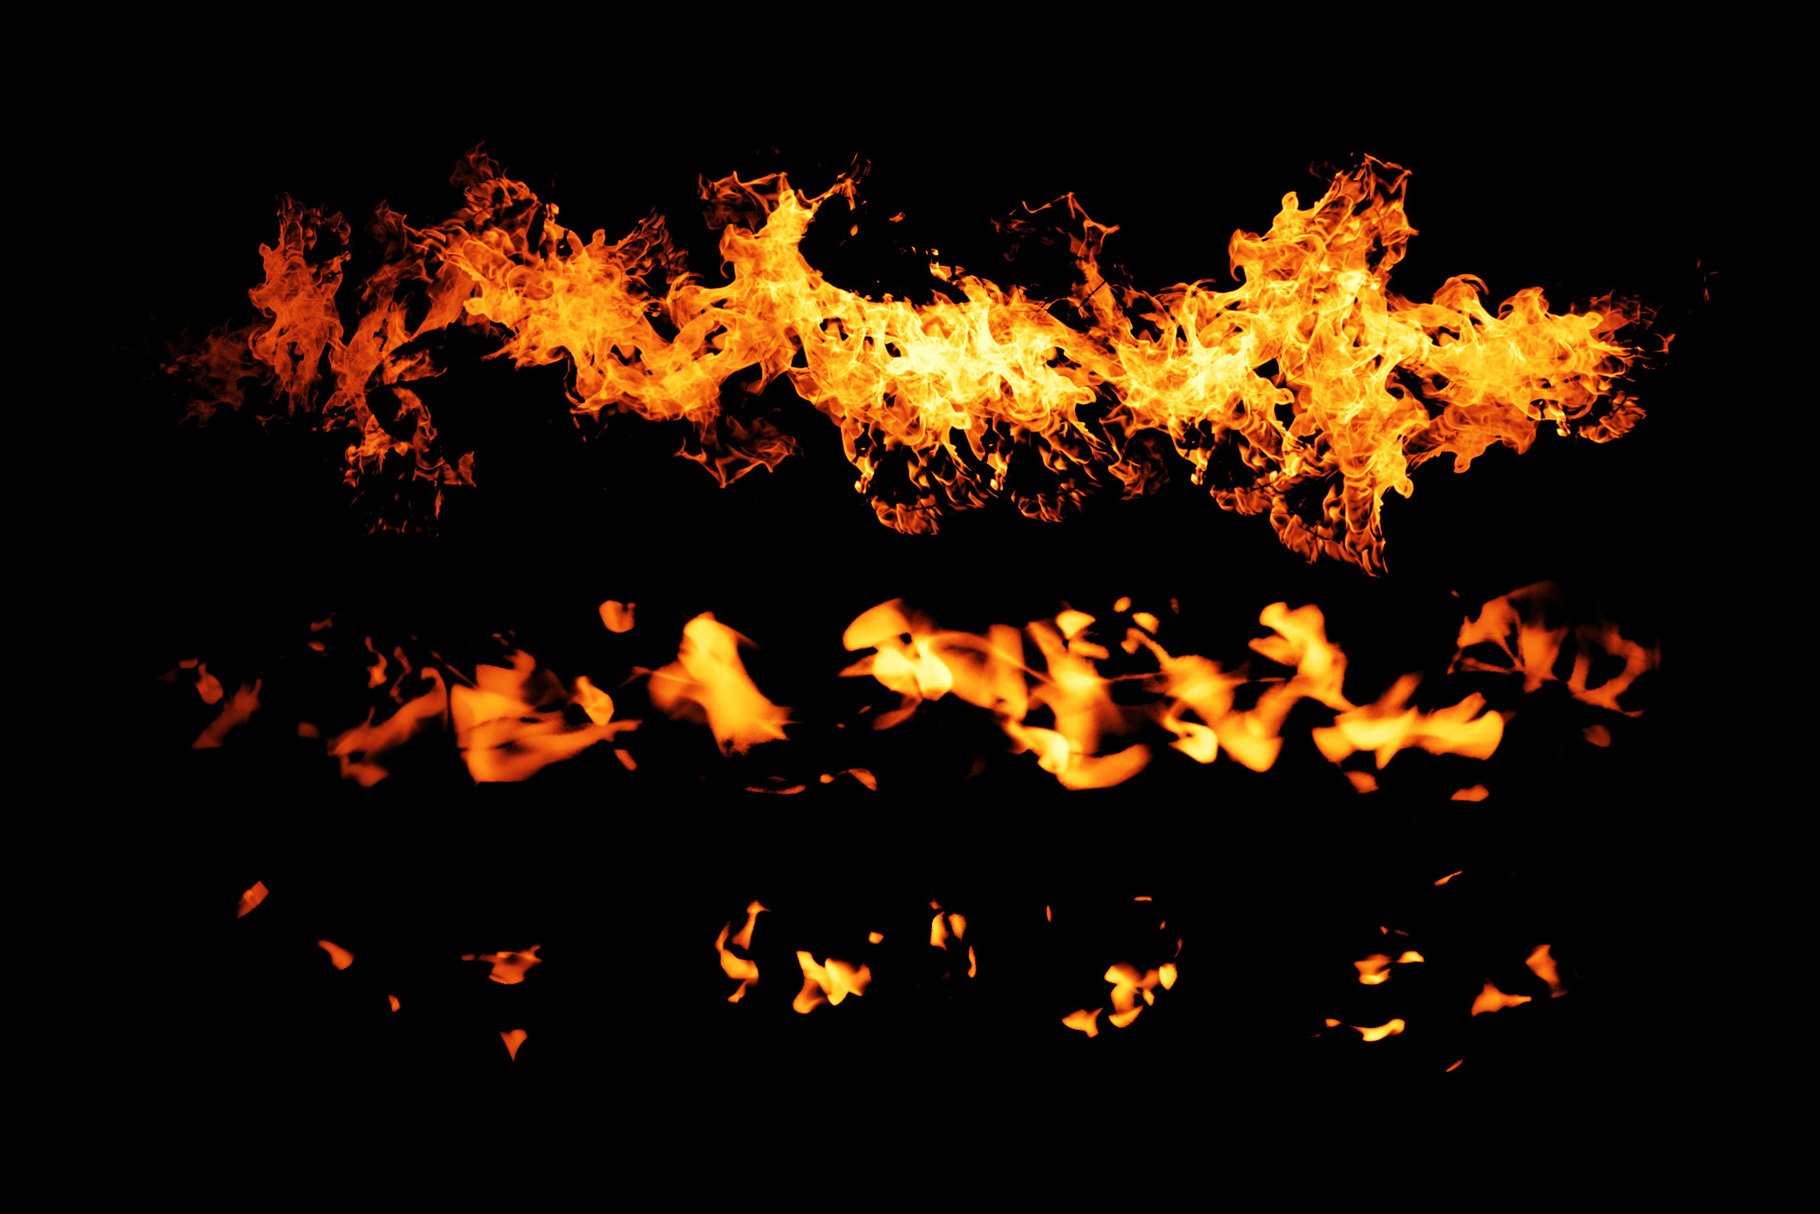 Dynamic Fire FX brush setpreview image.